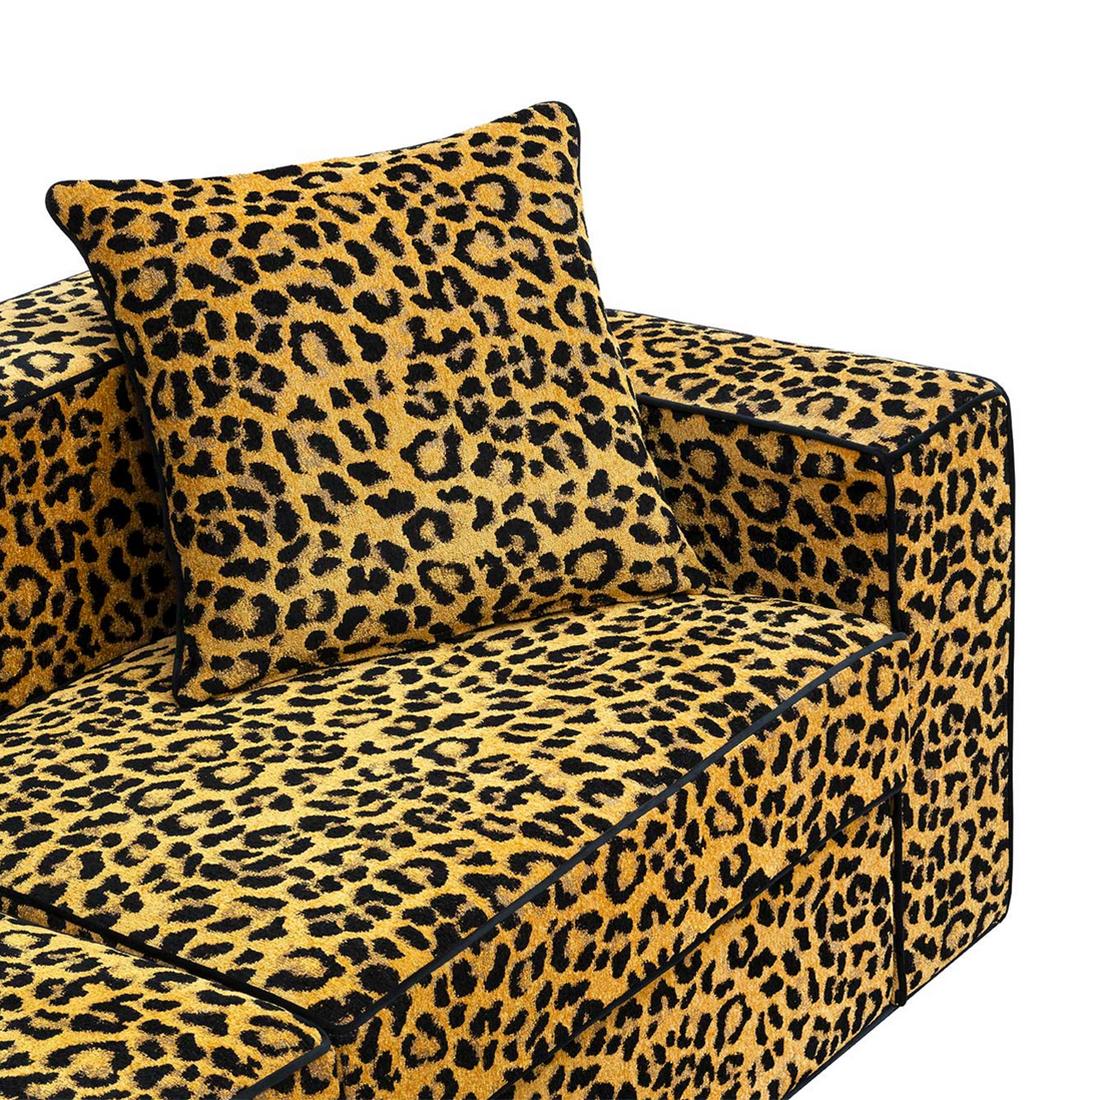 Hand-Crafted Leopard 2-Seat Sofa For Sale